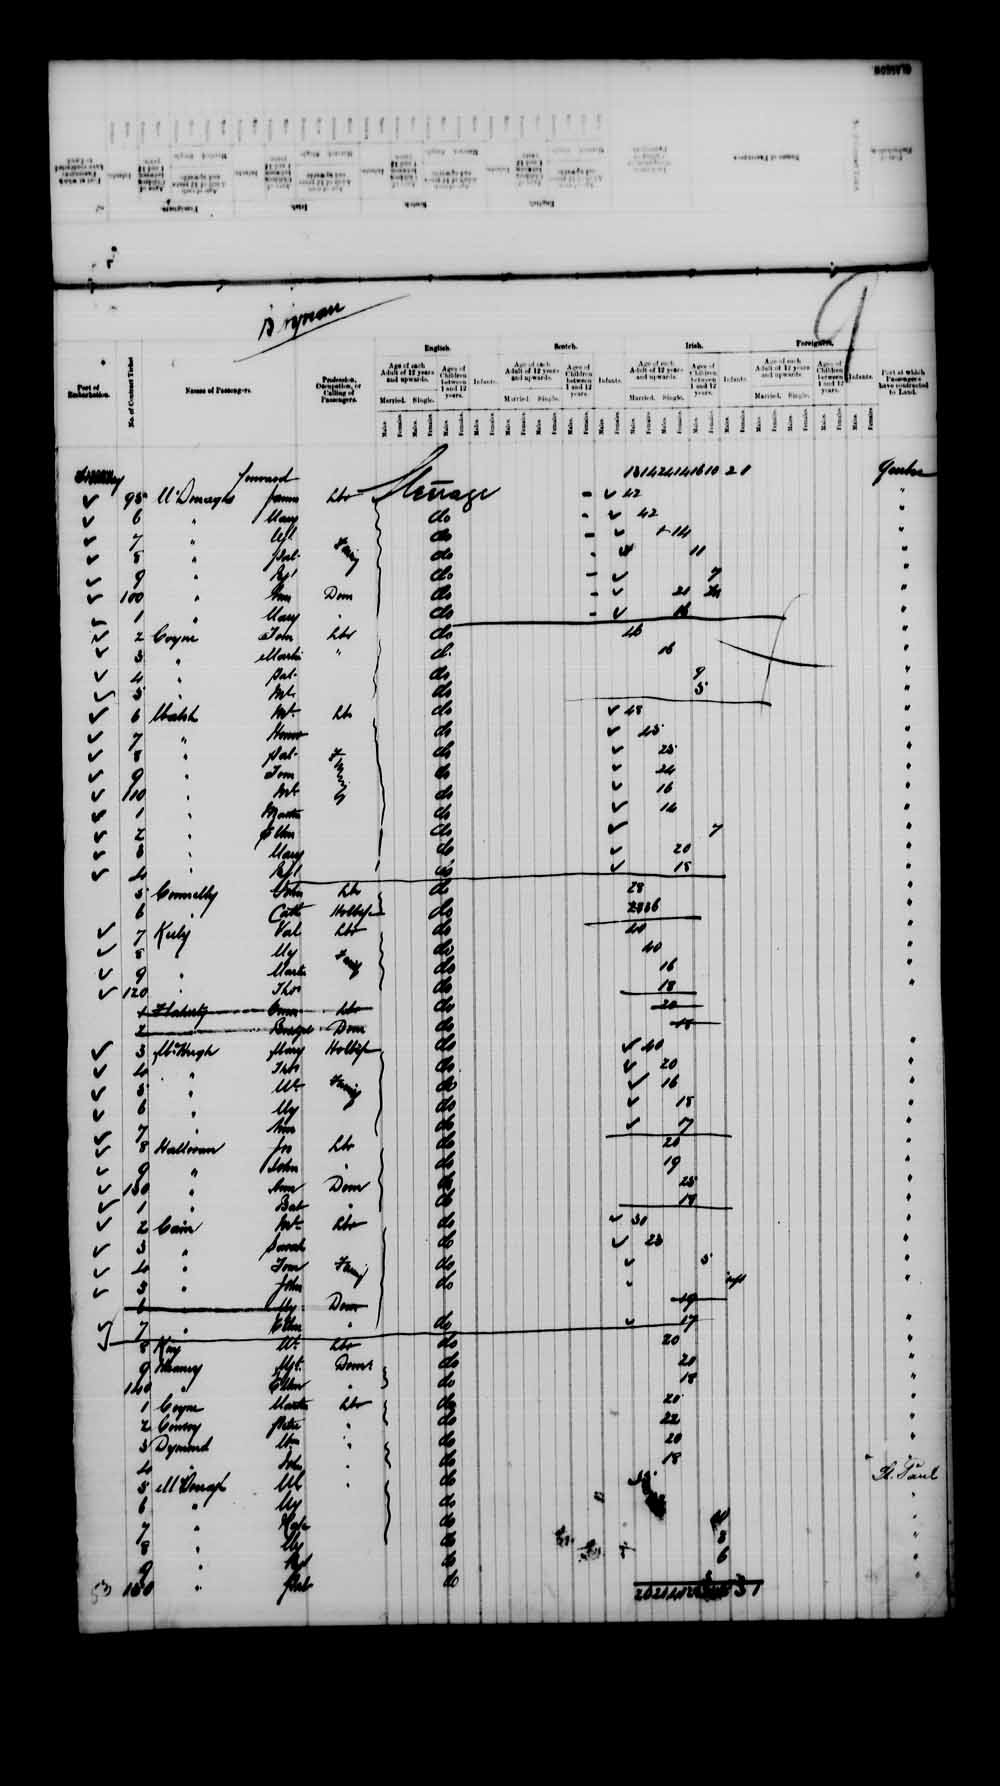 Digitized page of Passenger Lists for Image No.: e003542785